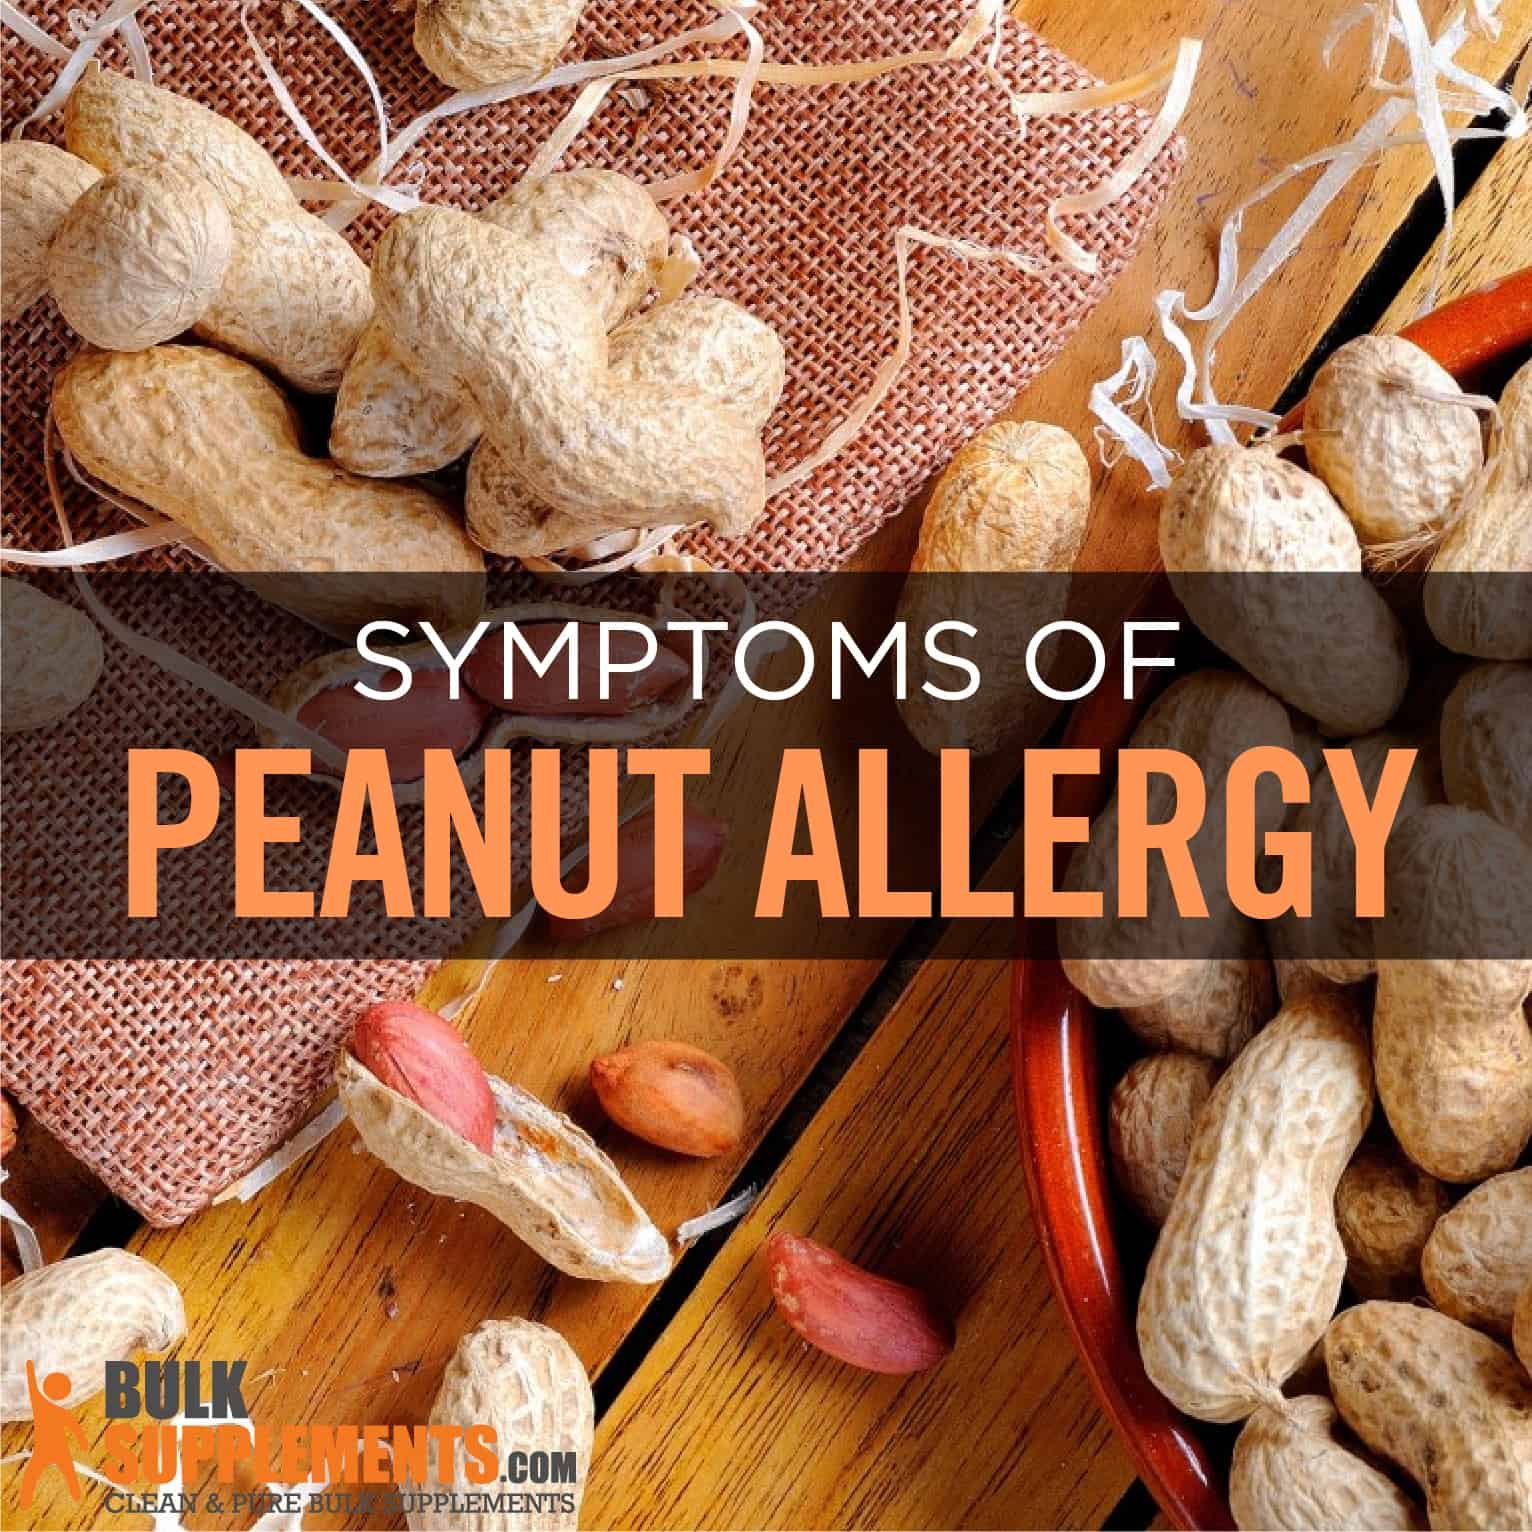 food allergy symptoms in adults